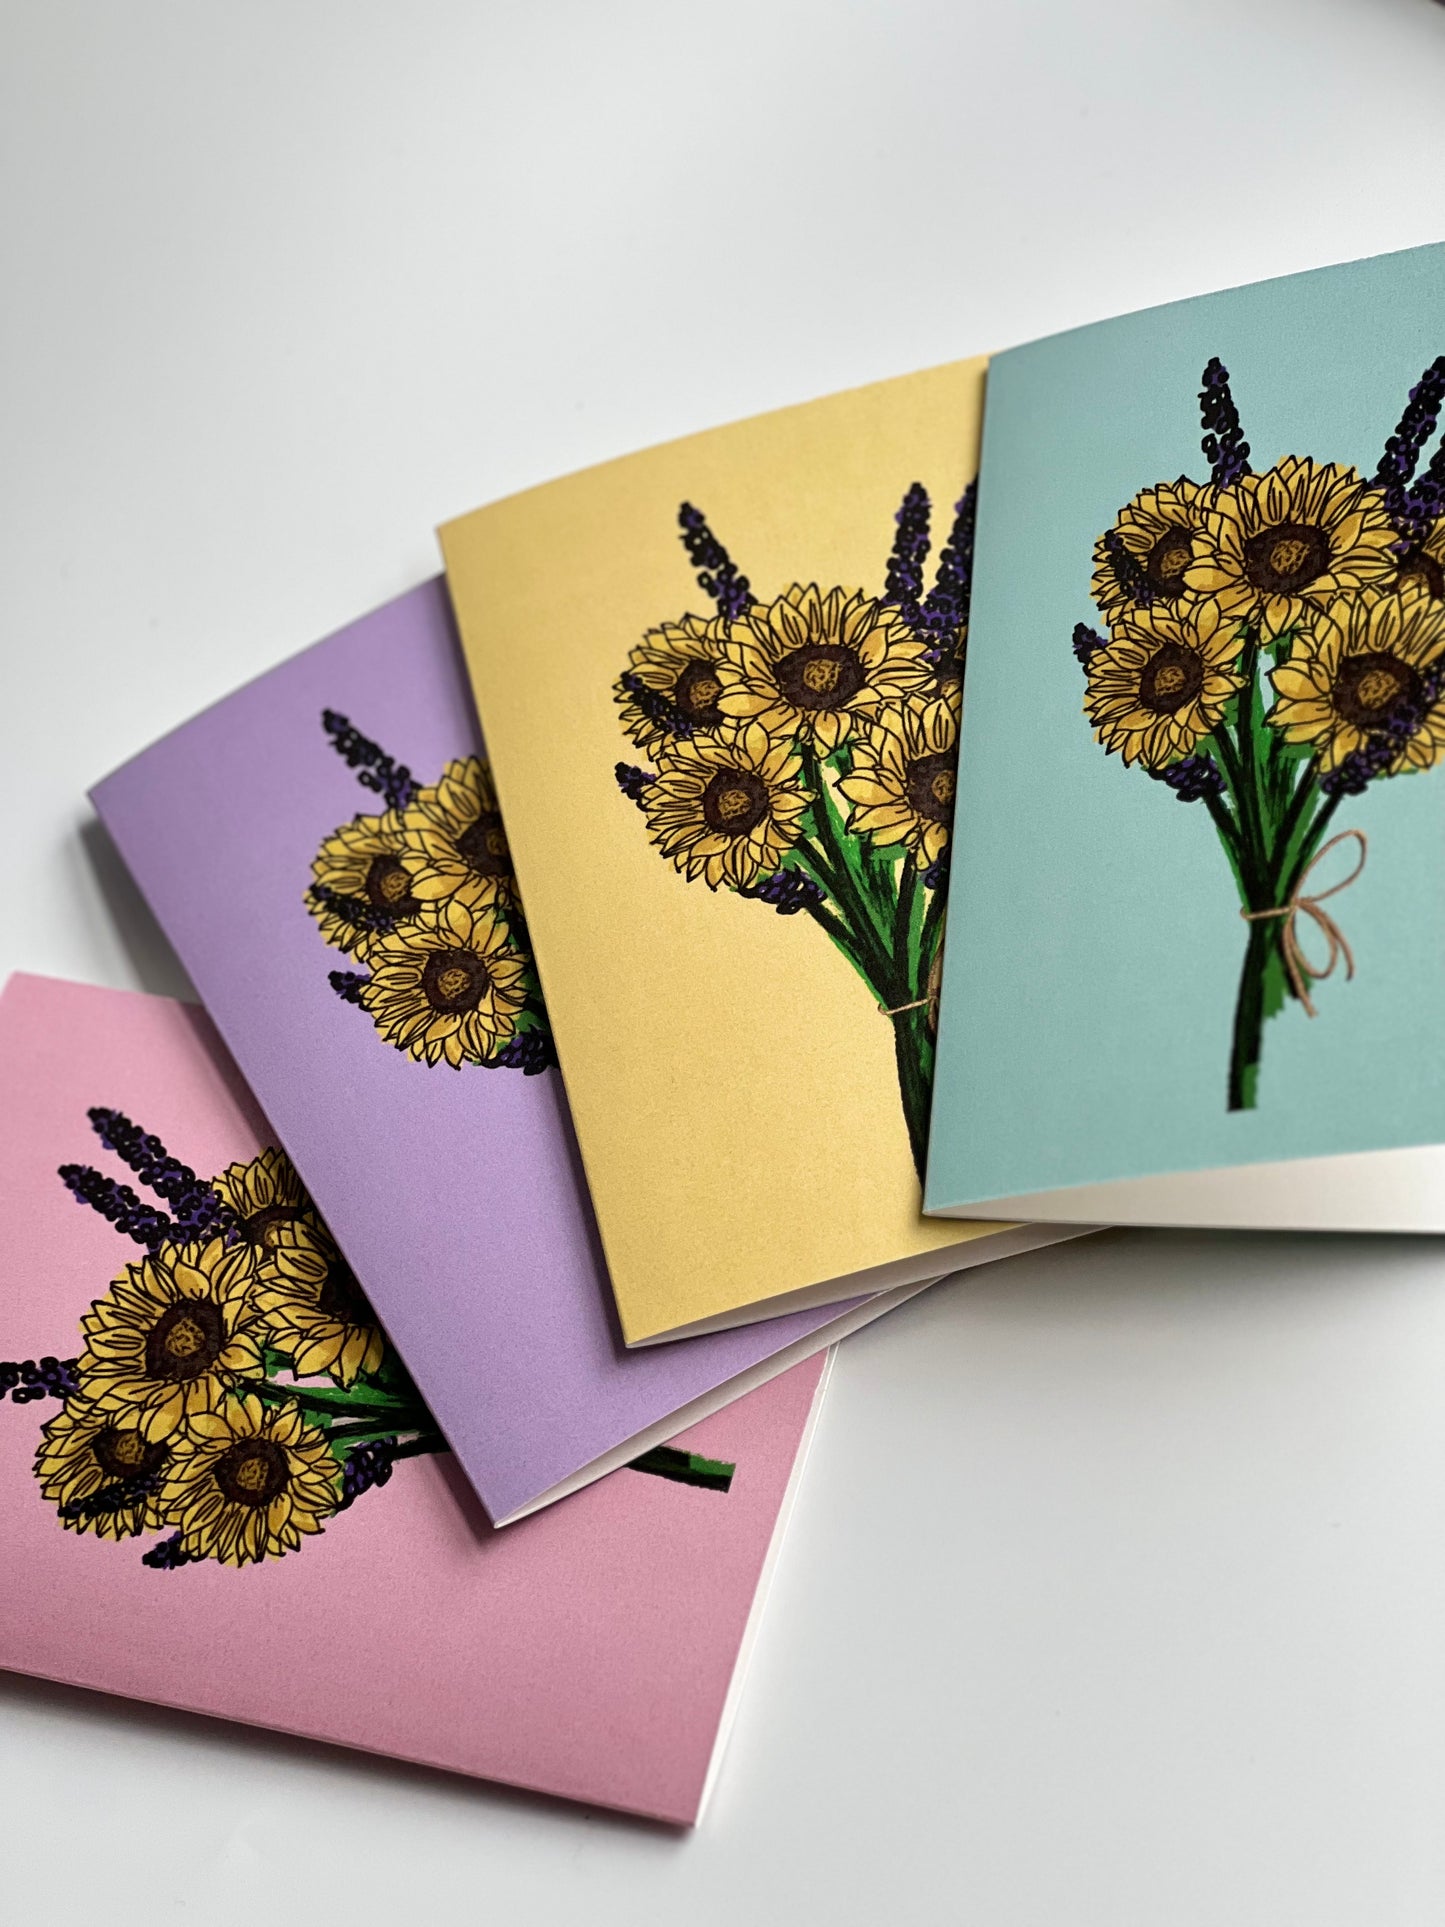 Sunflower Lavender Bouquet Greeting Card (Variety of Colors)